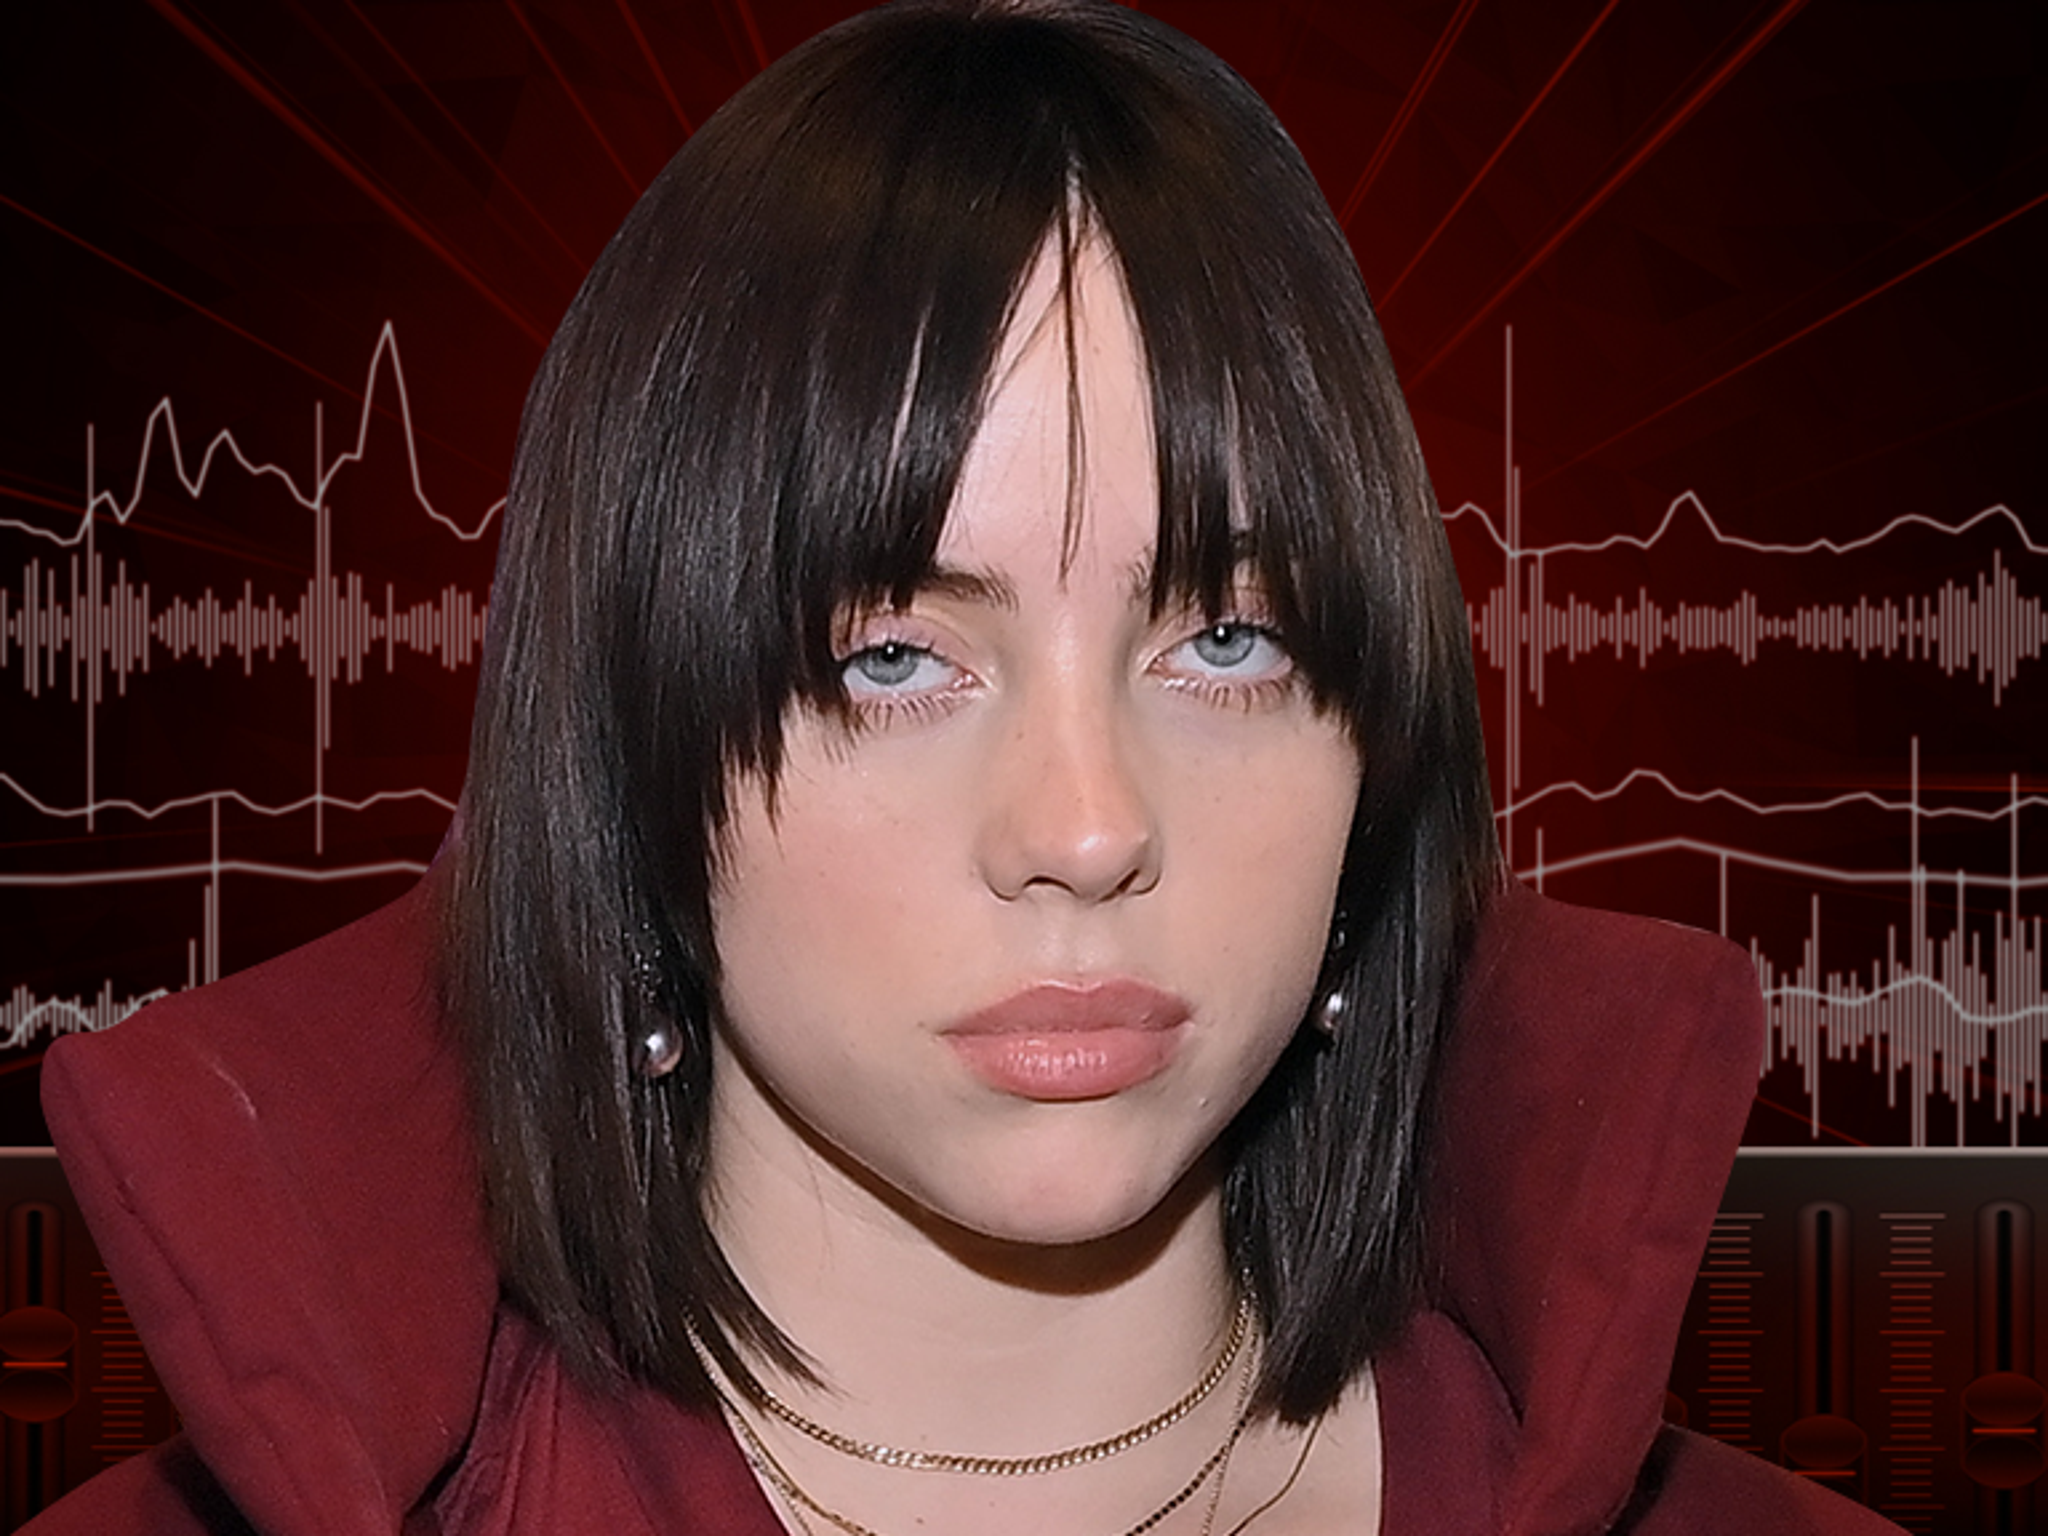 Short Xex Vdo Downliid - Billie Eilish Says She Started Watching Porn at 11, Calls it 'Disgrace'